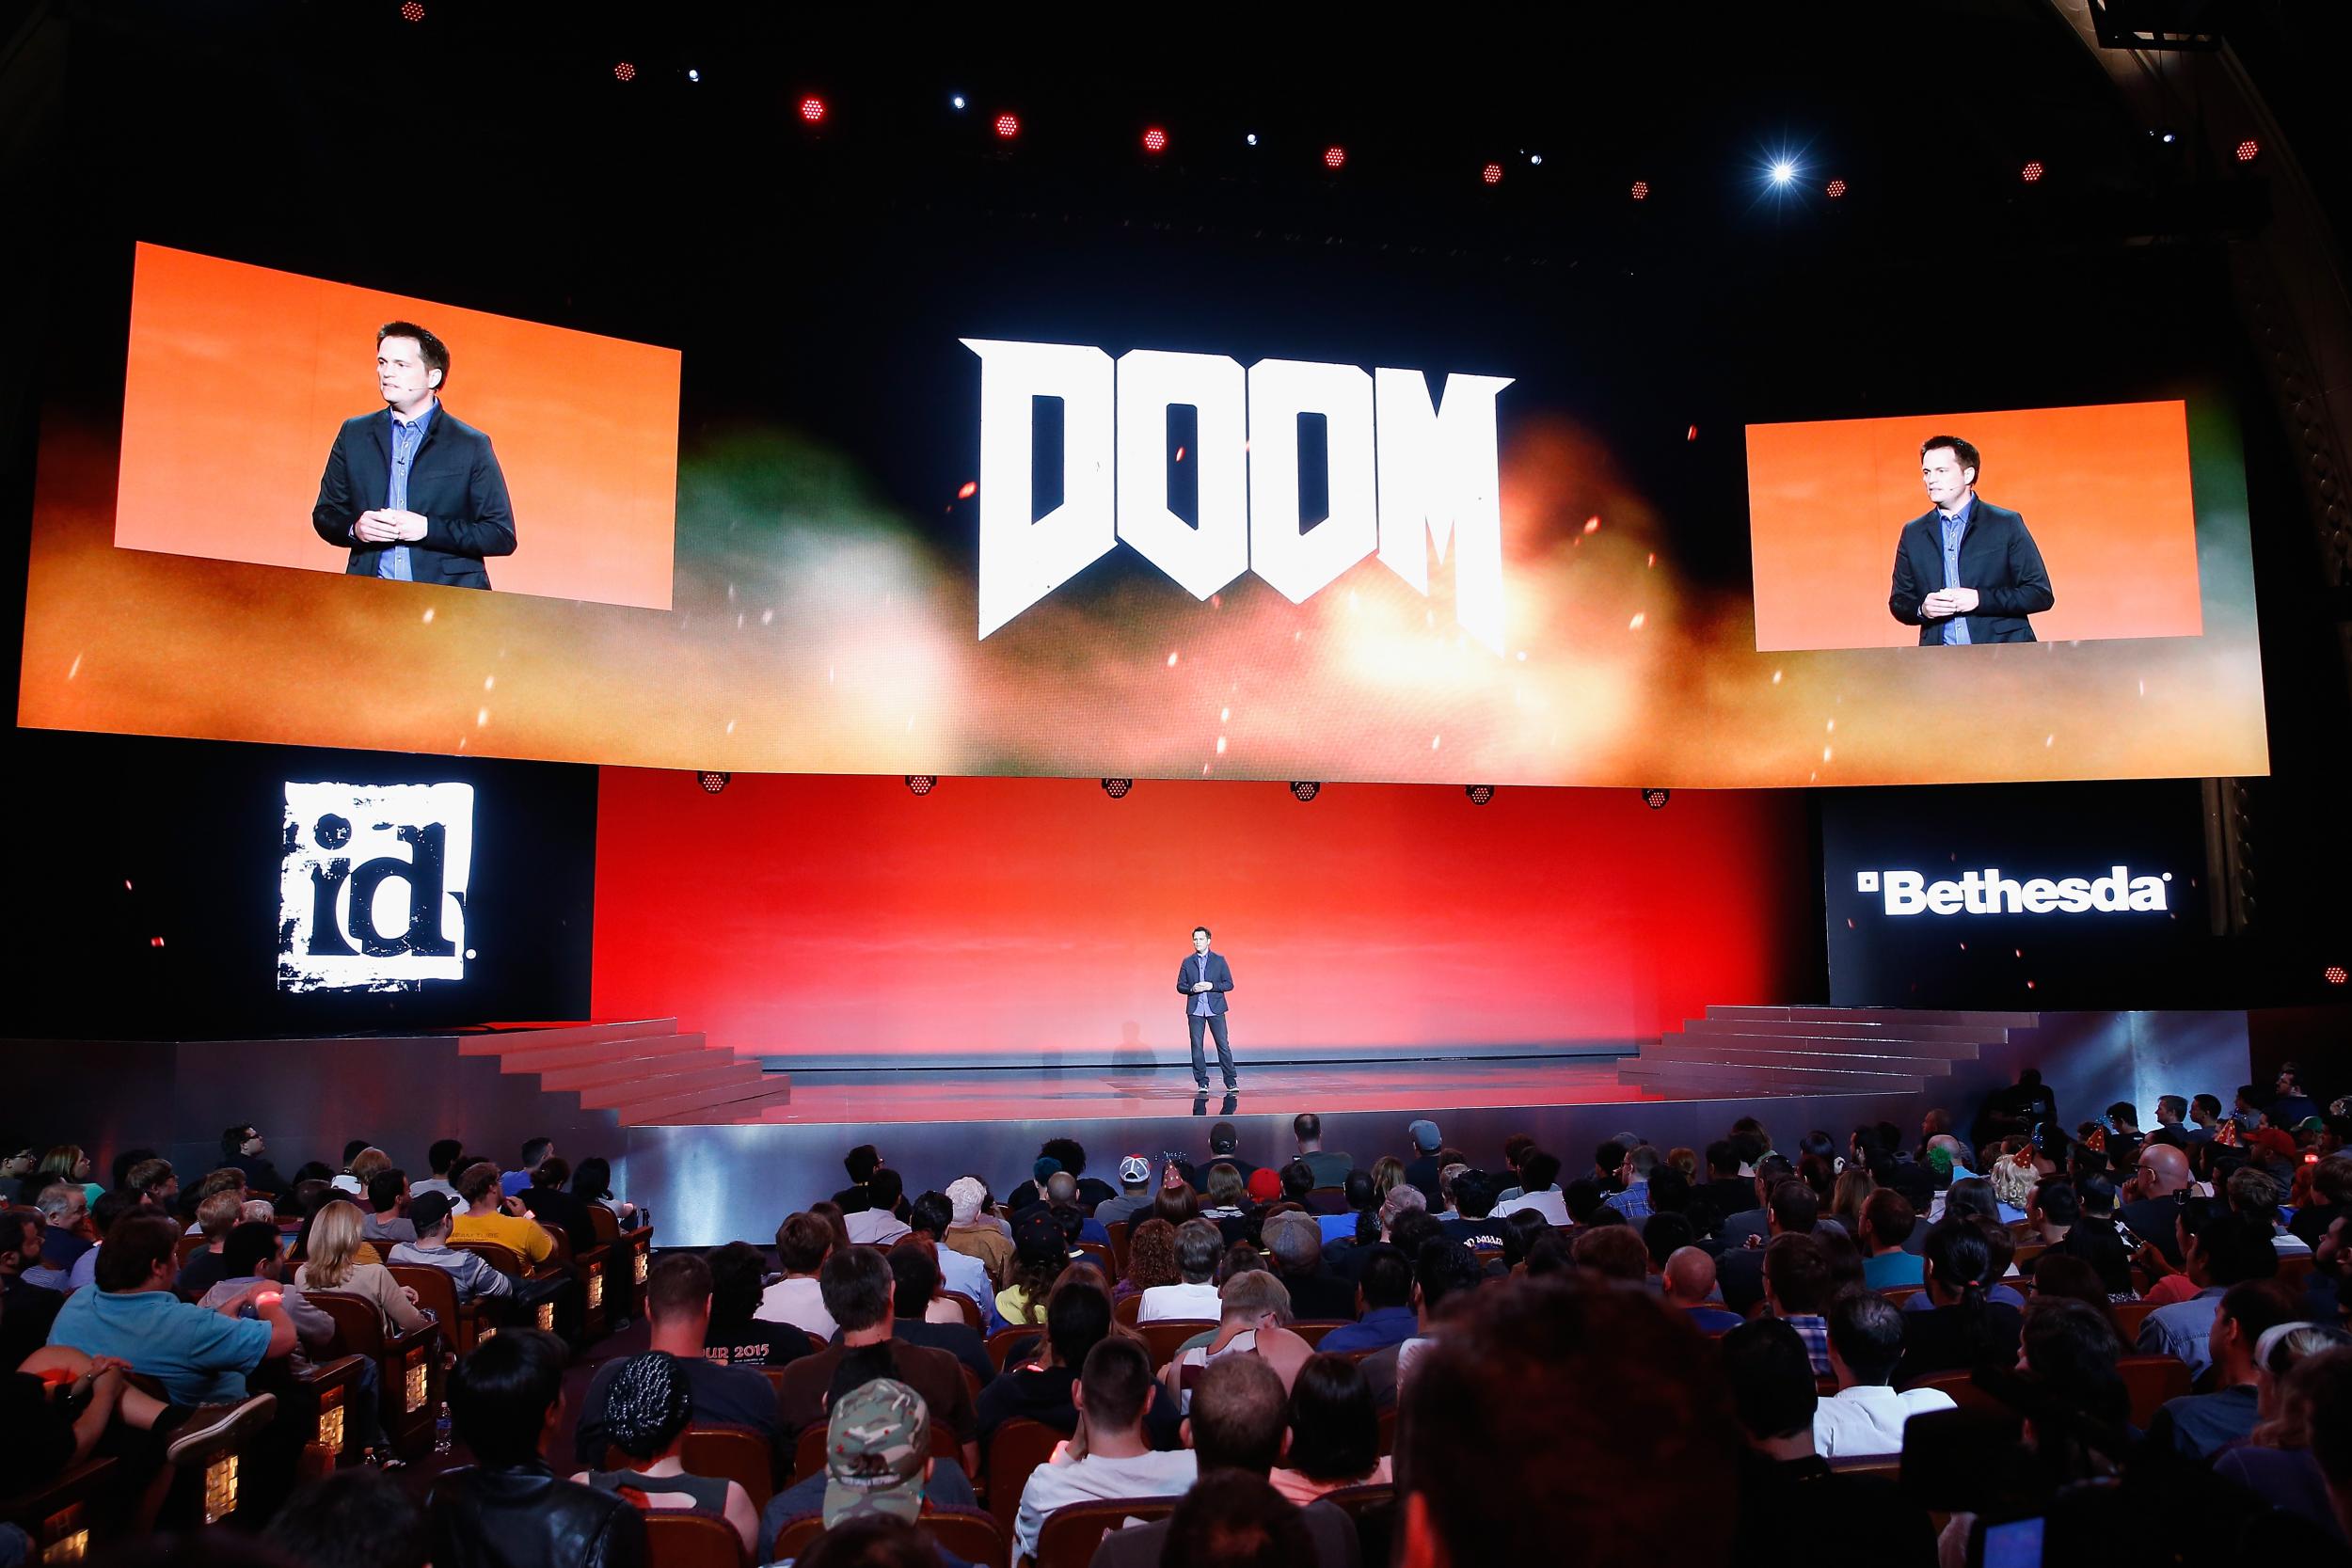 Executive Producer for Id Software, Marty Stratton speaks about 'Doom' at E3 2015